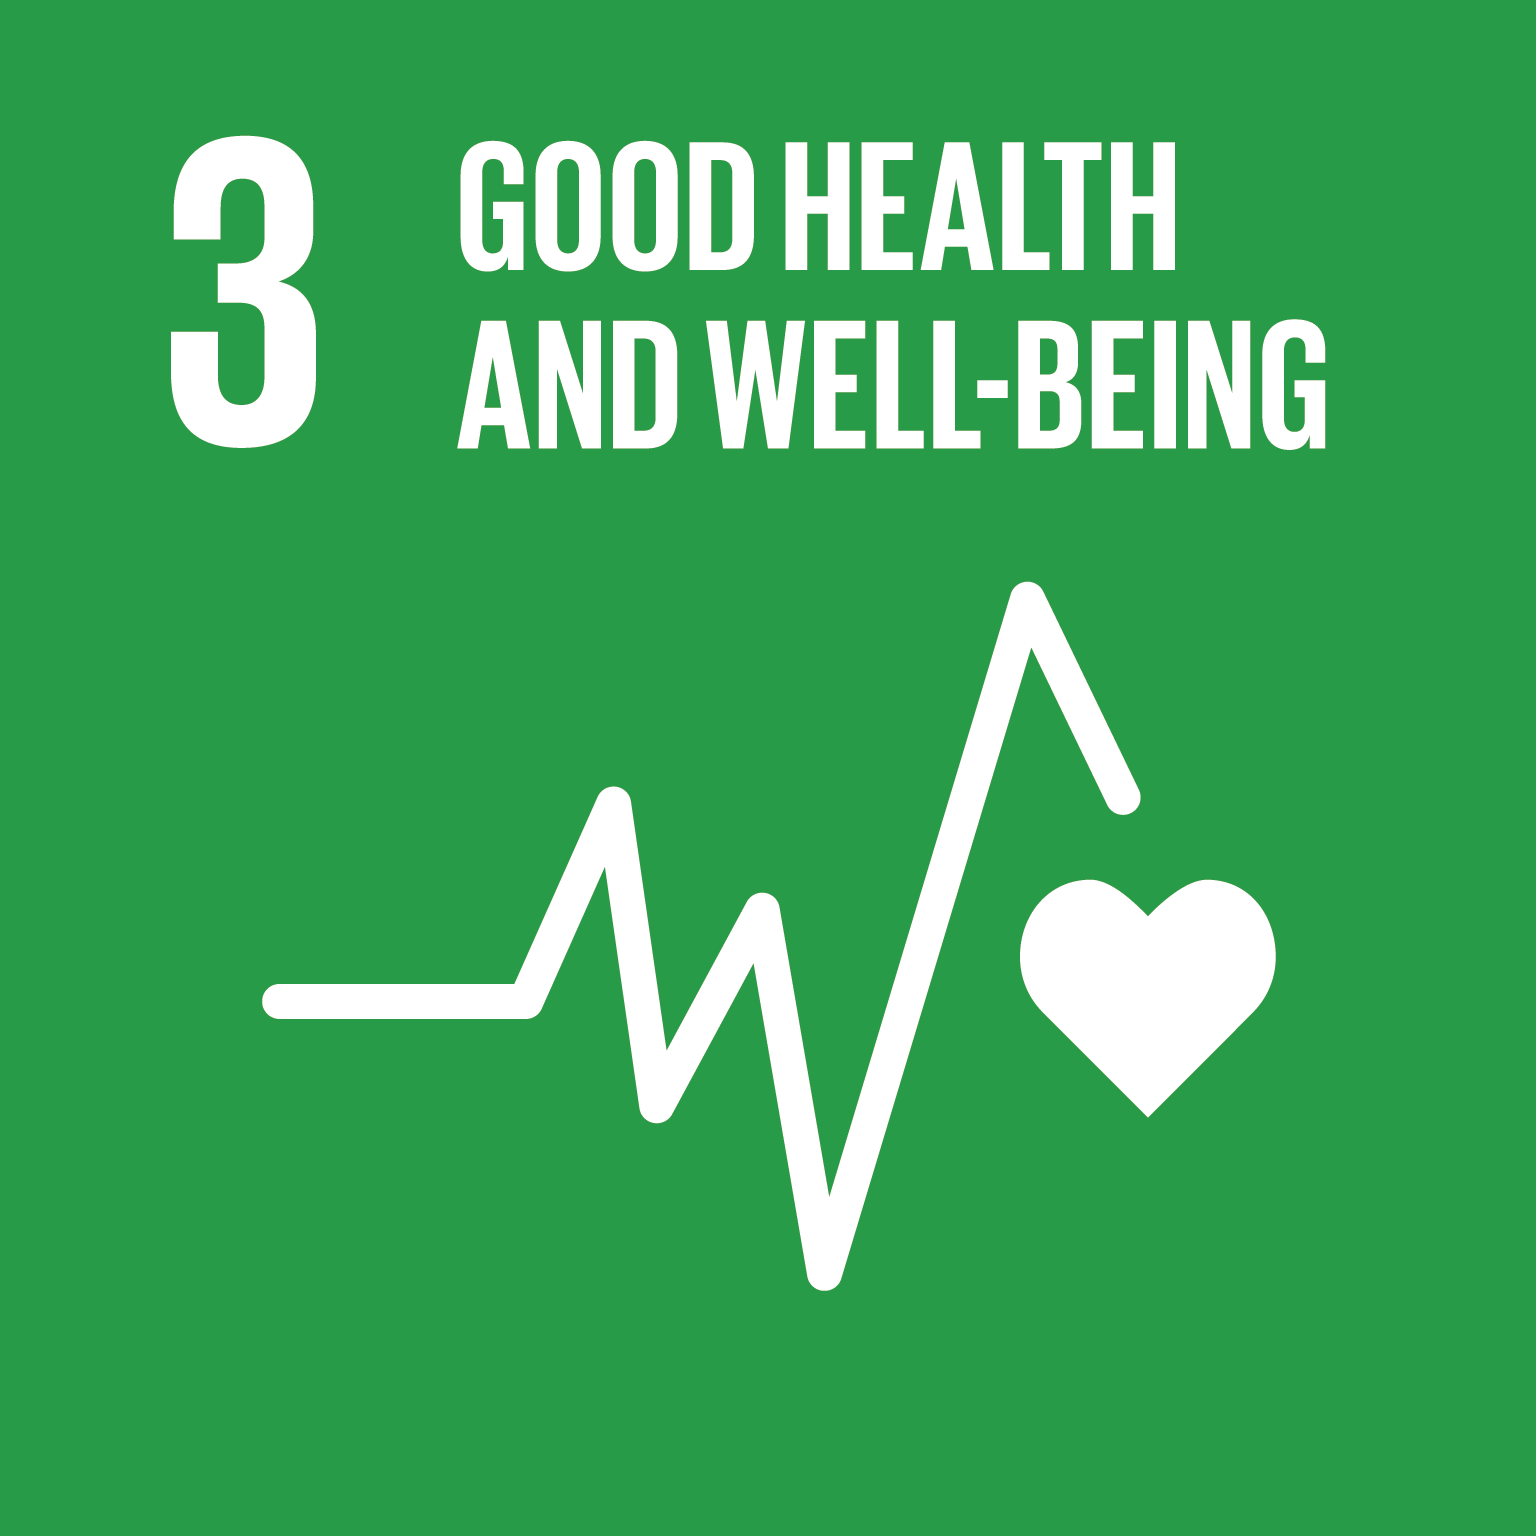 SDG - 3: Good health and well-being